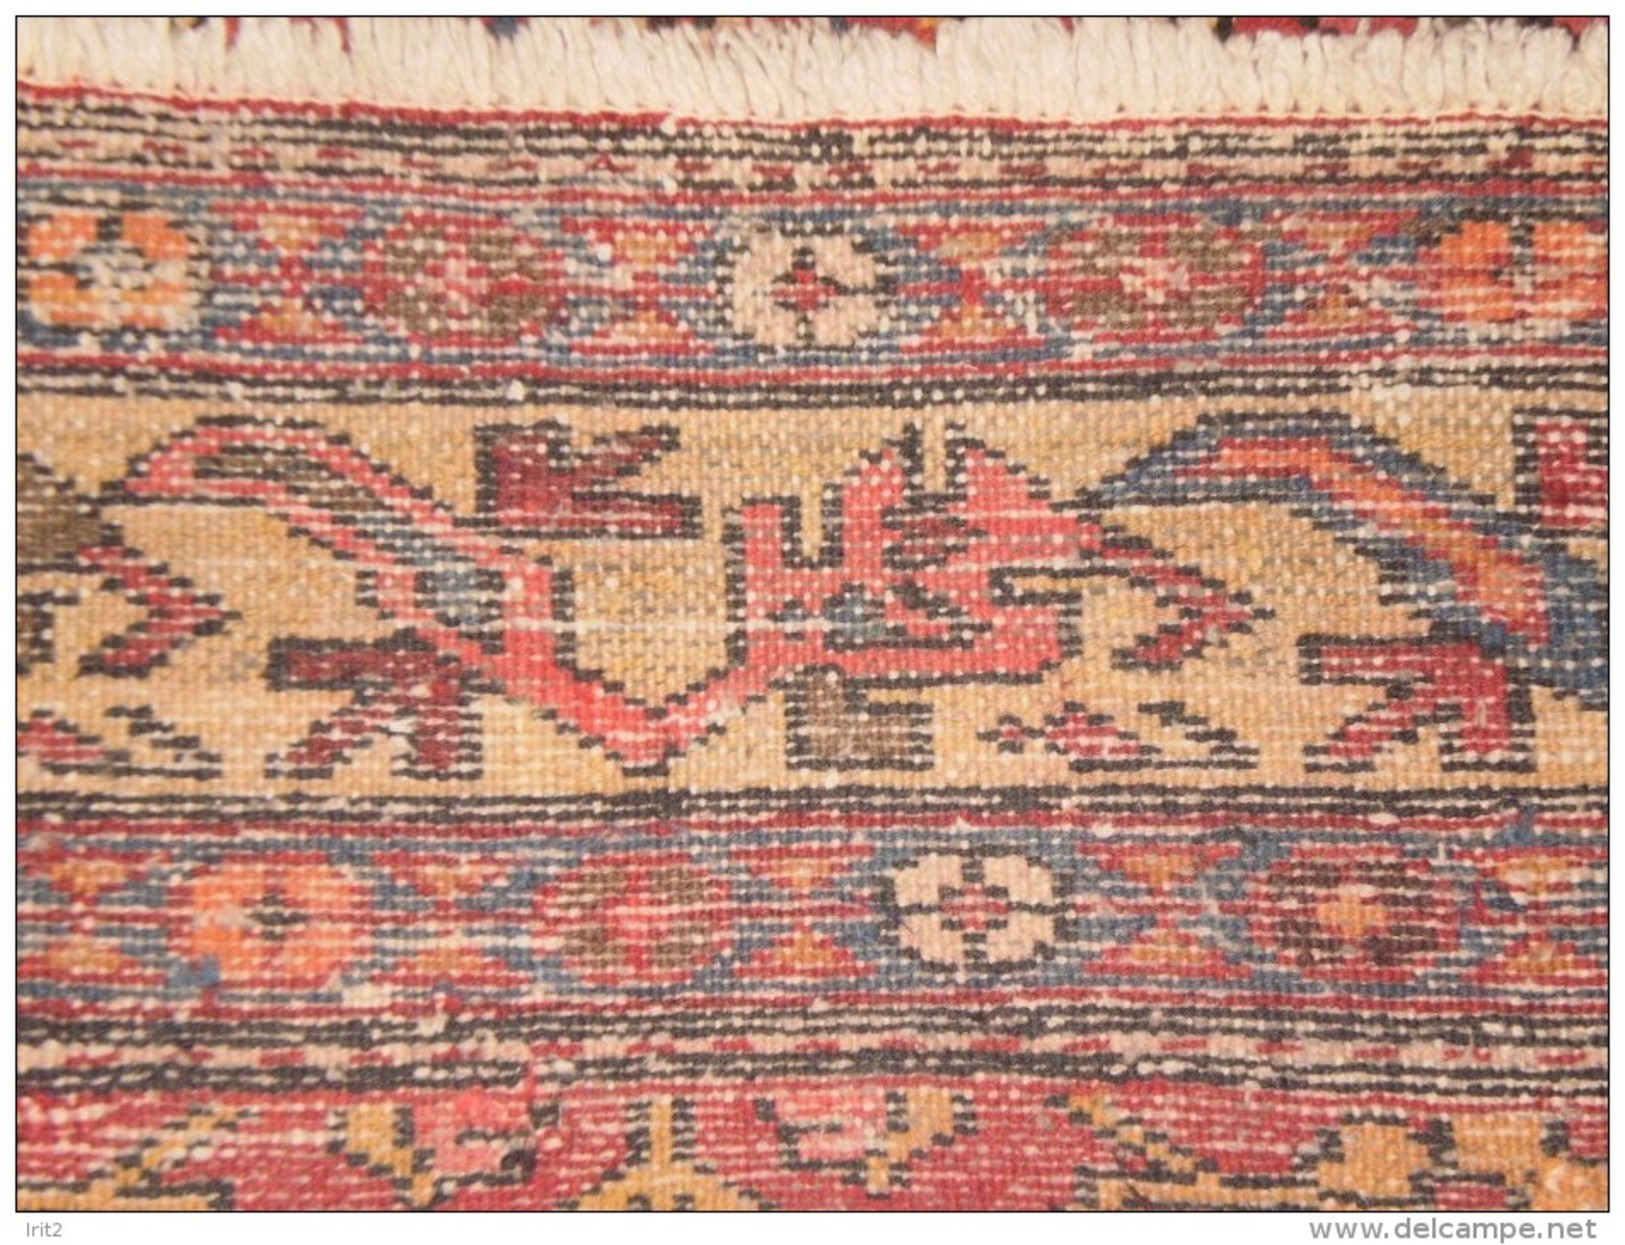 PERSIAN CARPET ORIGINAL PERSIA FULL QUALITY HAND KNOTTED 'WOOL COLOR TO PLANT OLD PROCESS PERIOD YEAR 1930 - Rugs, Carpets & Tapestry